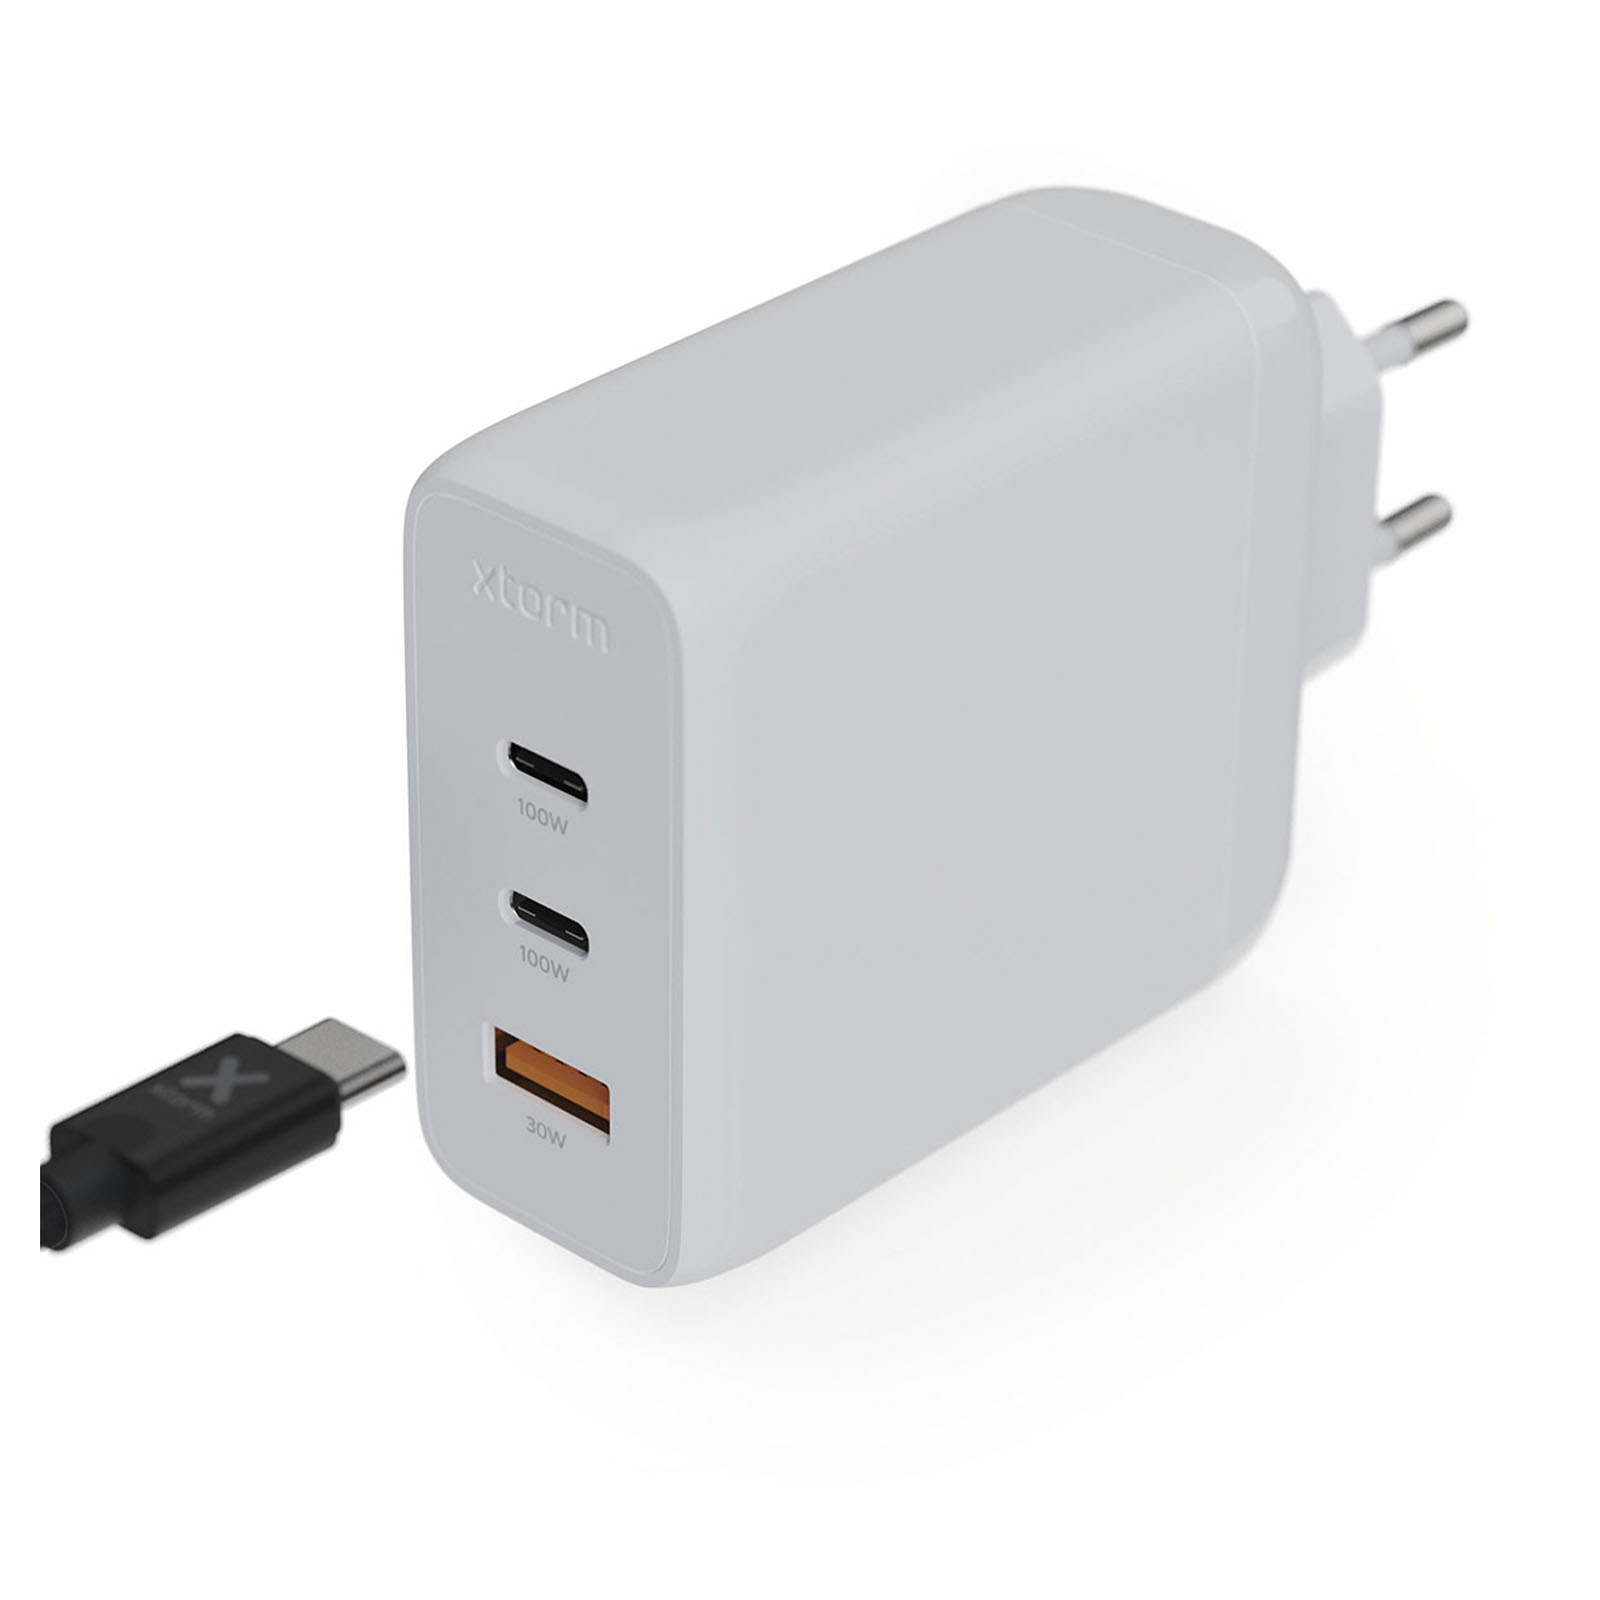 Advertising Chargers - Xtorm XEC100 GaN² Ultra 100W wall charger - 5